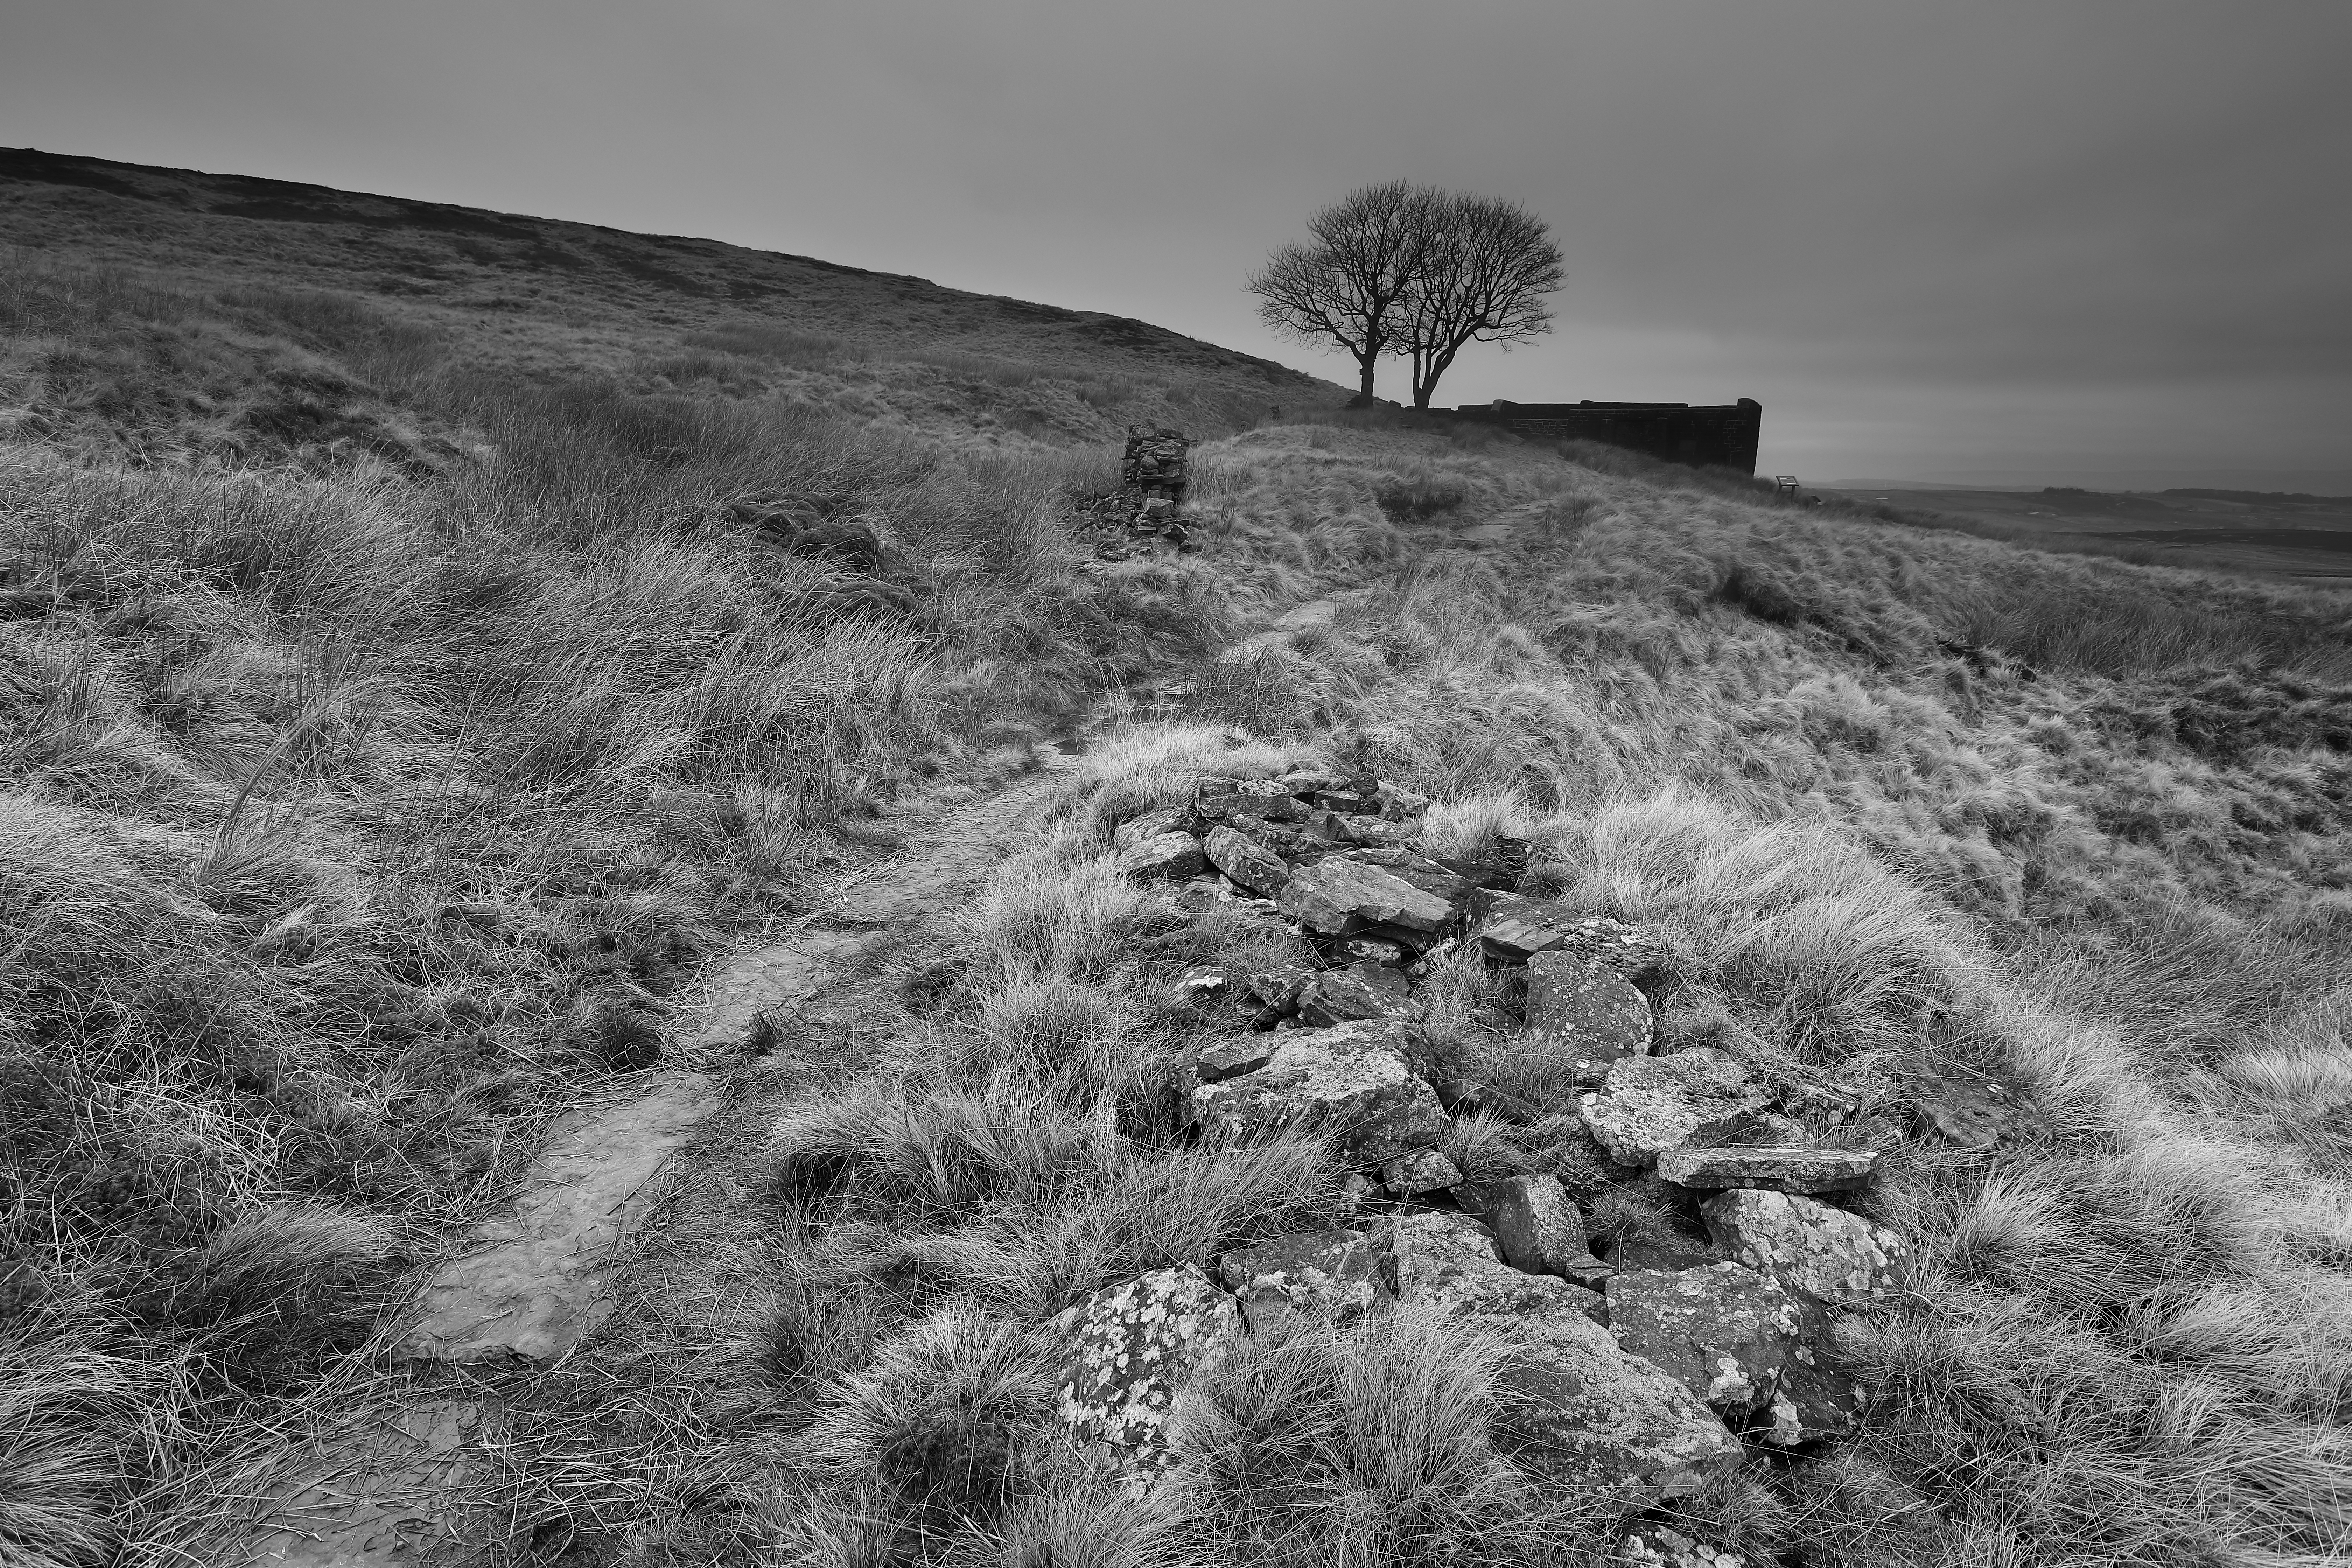 The Yorkshire Moors of Wuthering Heights. Image: Martin Priestly